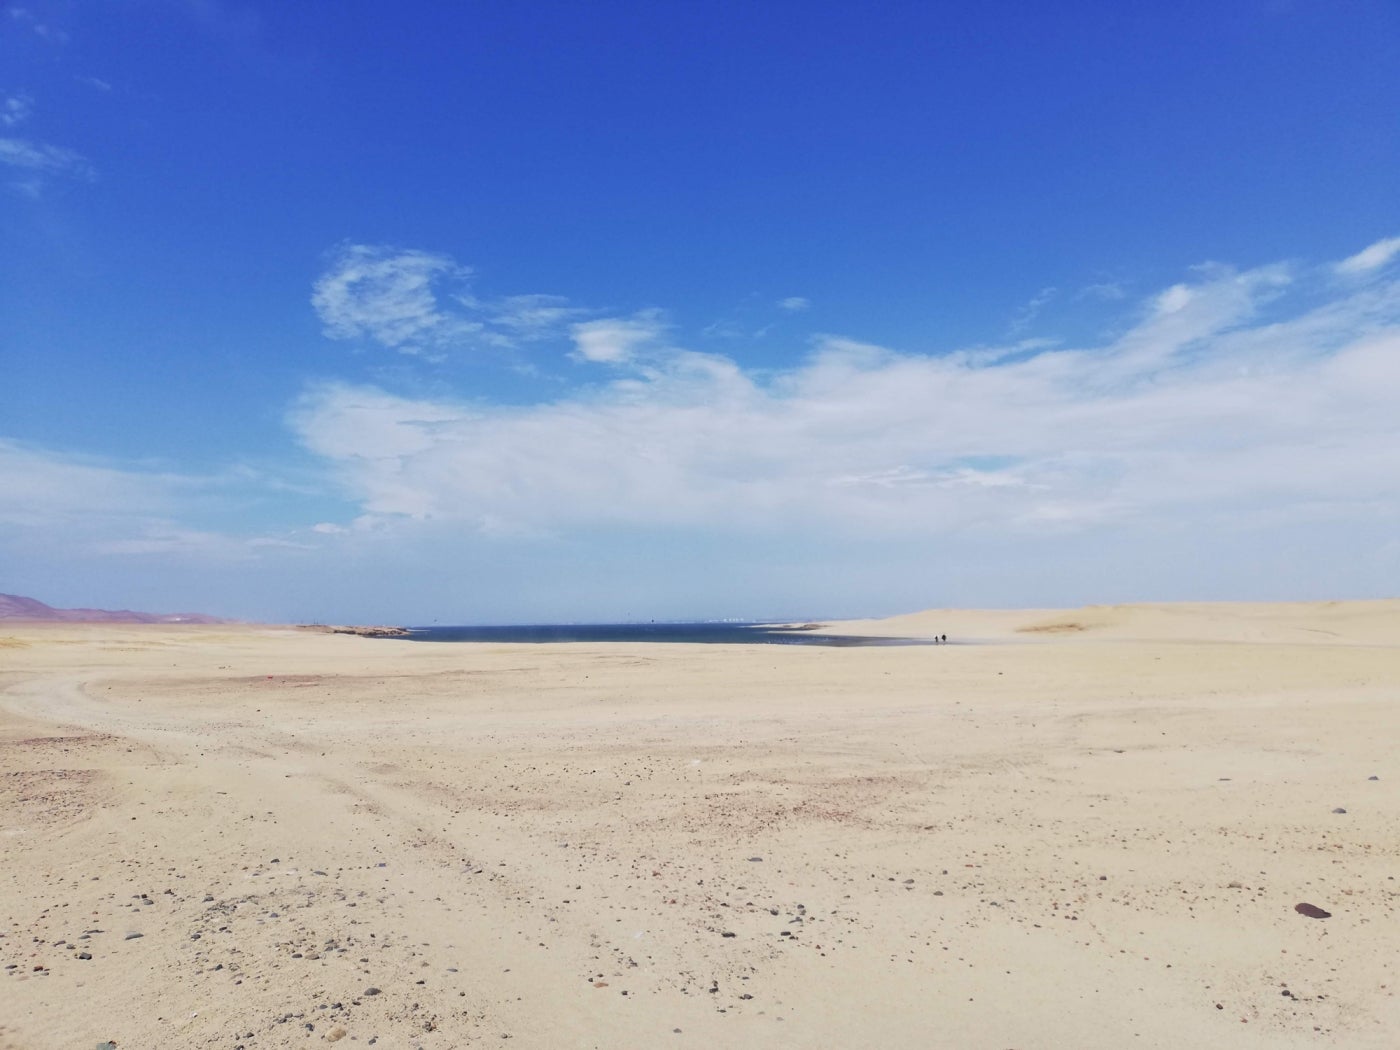 An open expanse of sandy, flat terrain with a bay visible in the distance under a clear blue sky. This area of Peru's Paracas National Reserve is called Cequion Bay.